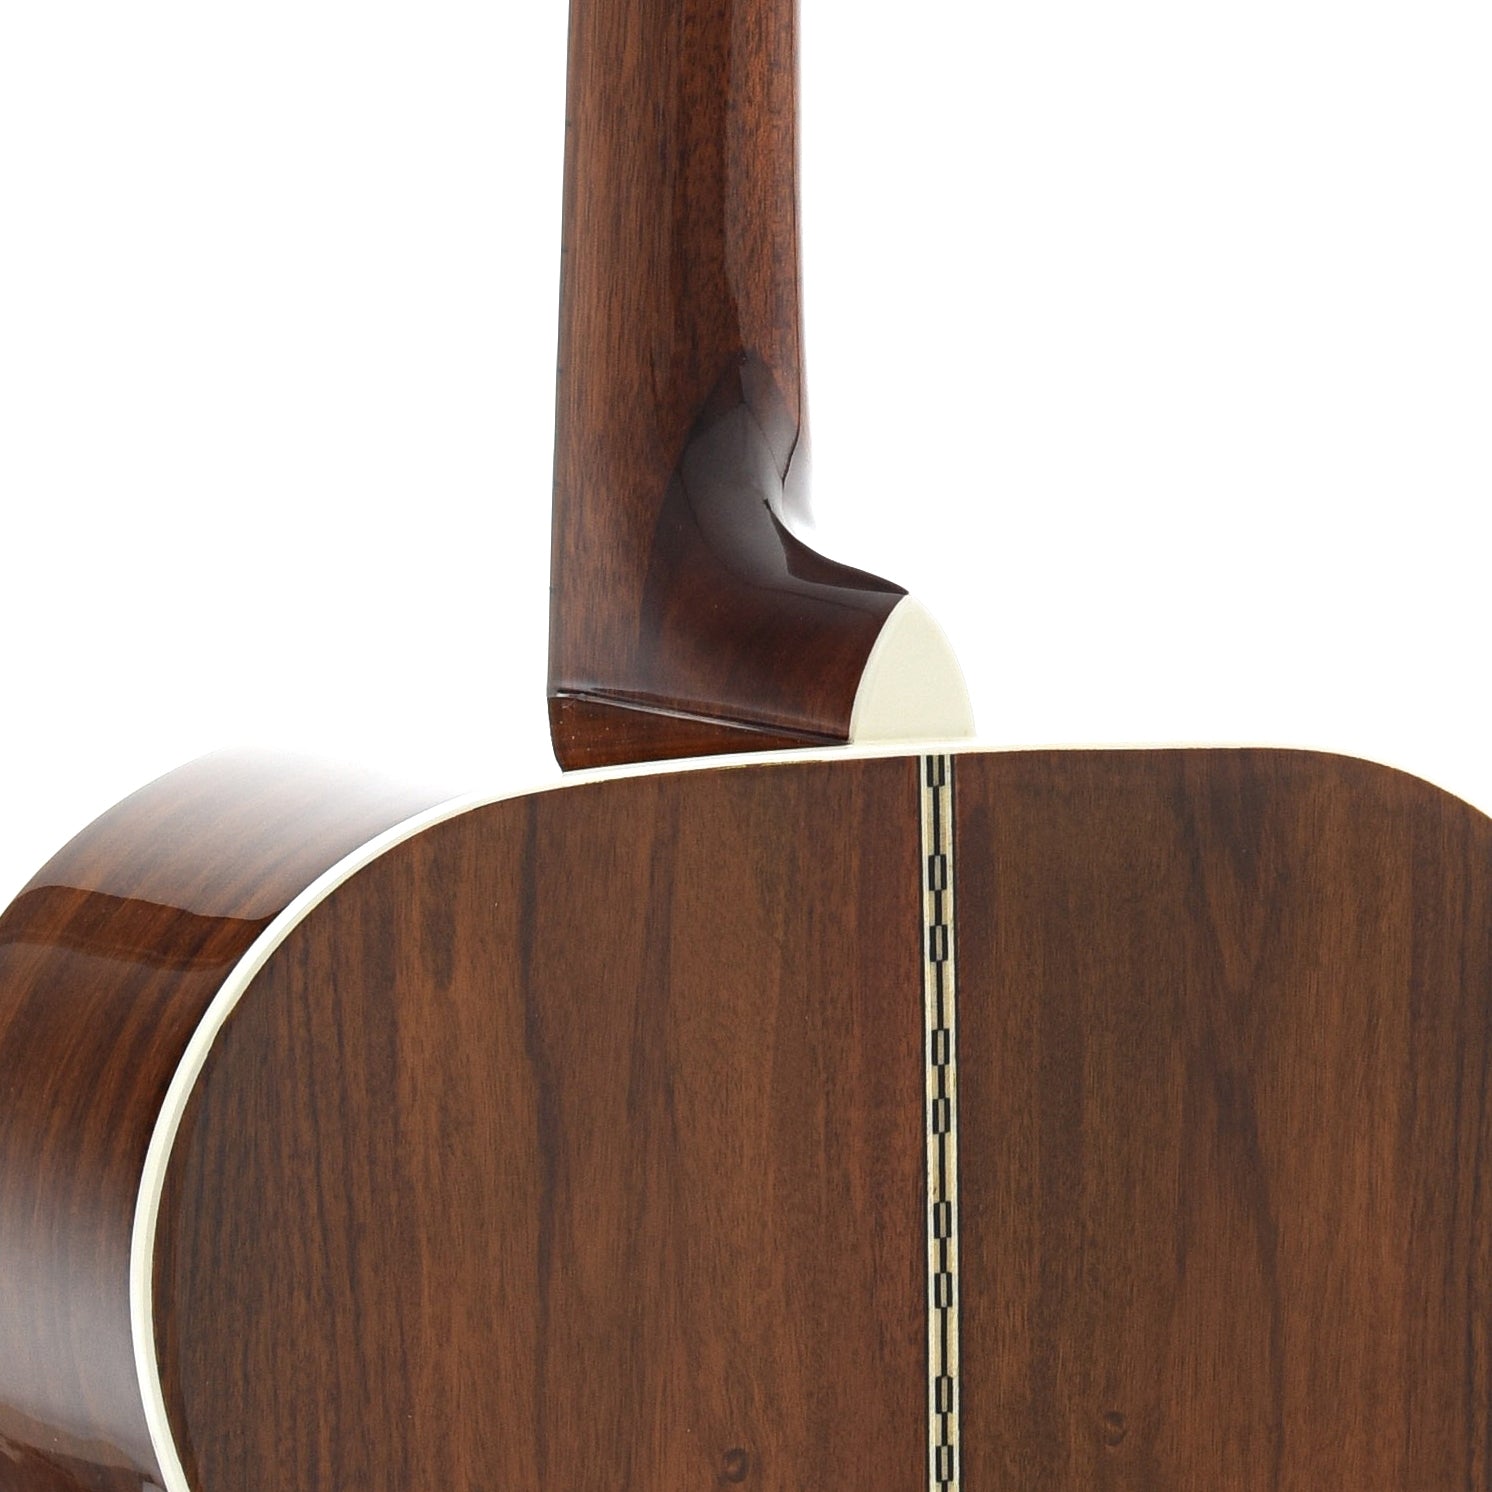 Neck Joint of Blueridge Contemporary Series BR-60T Tenor Guitar 